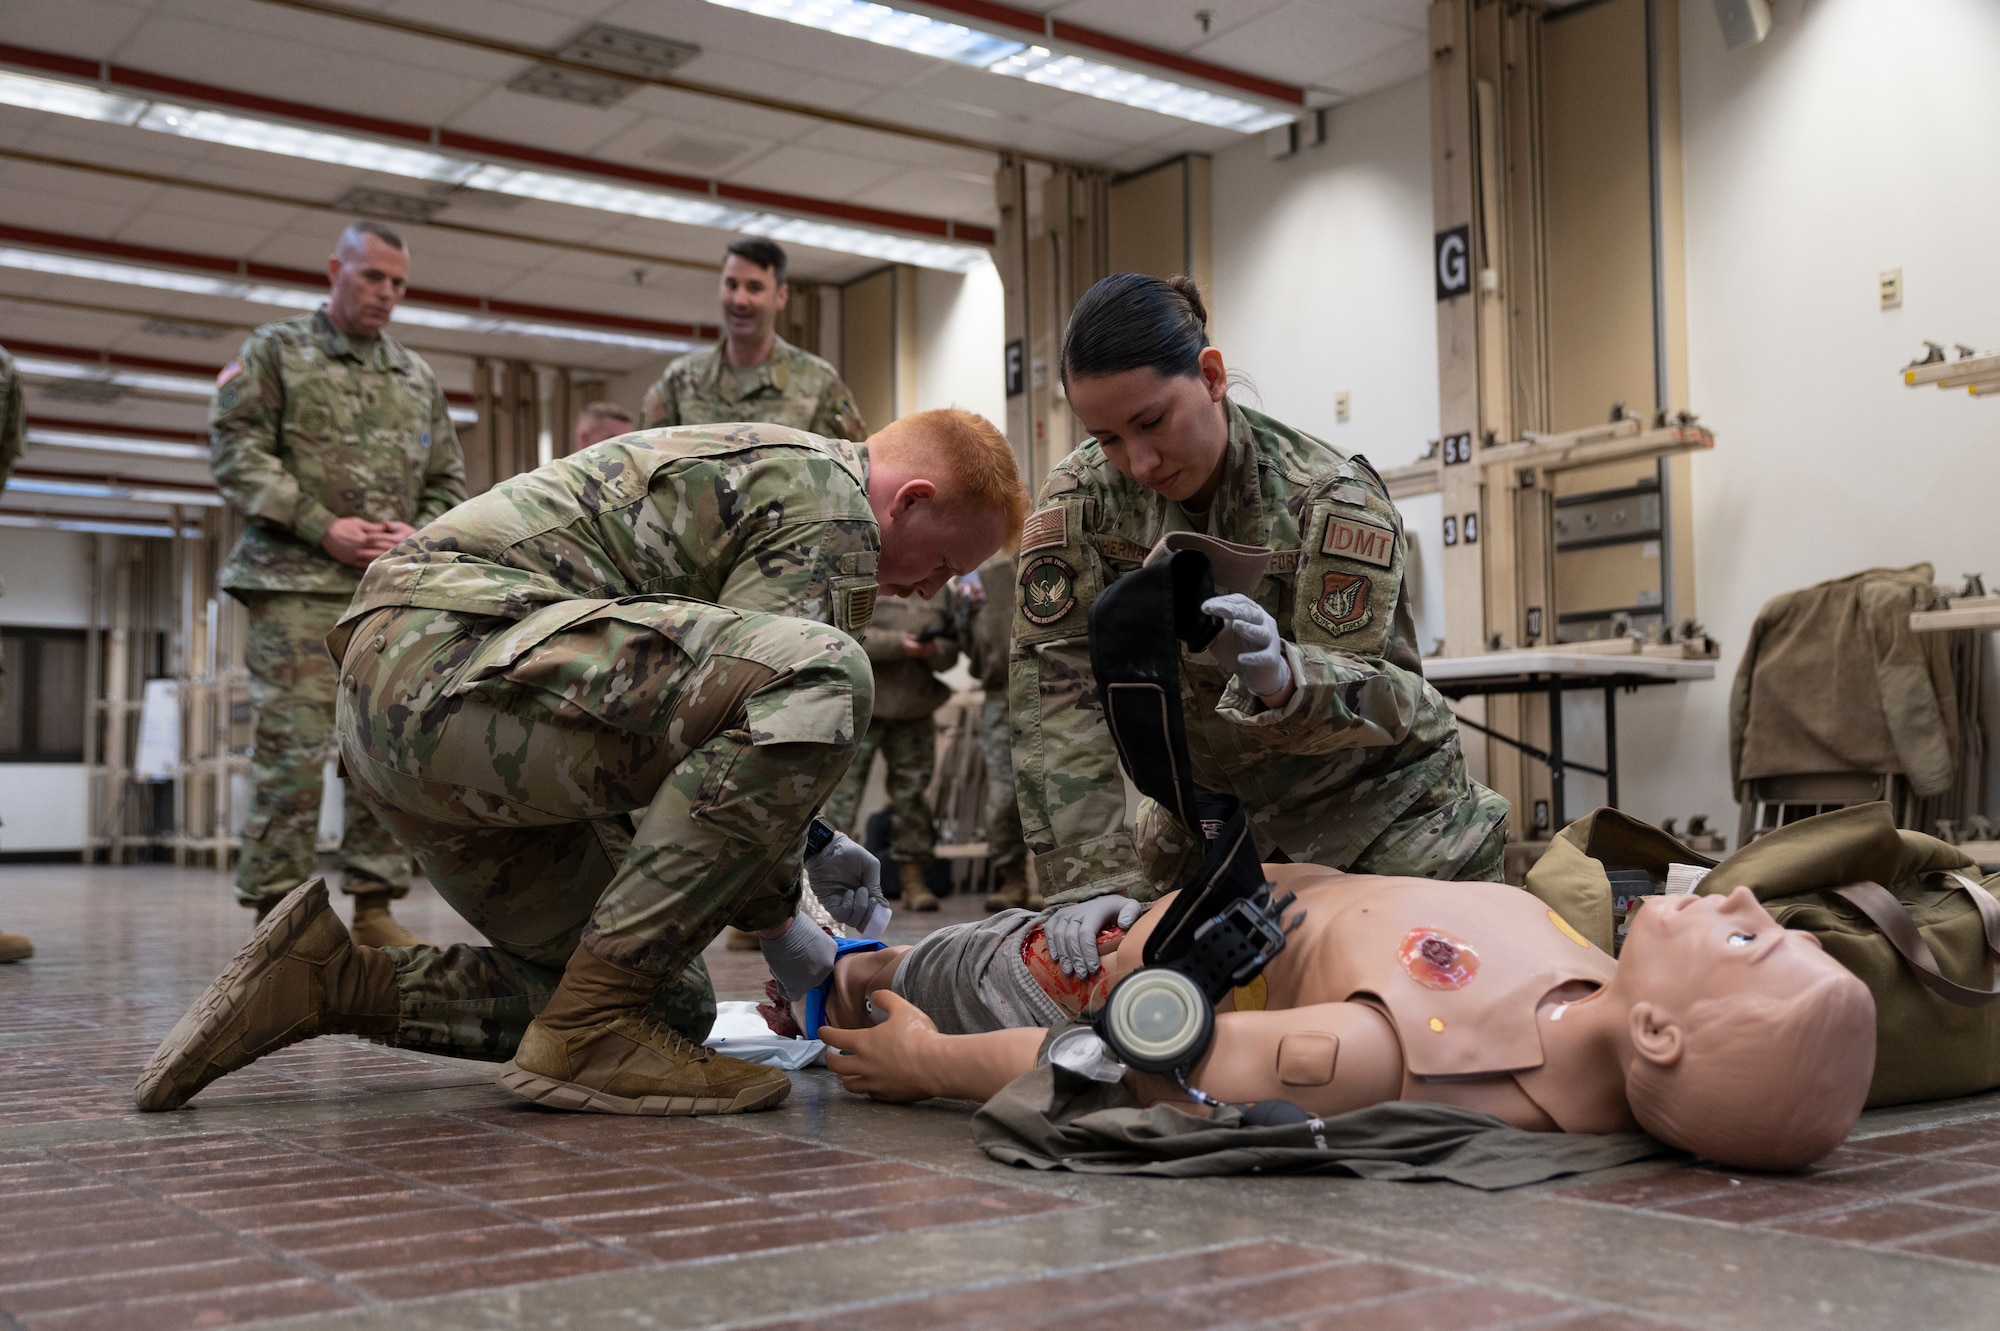 U.S. Air Force members assigned to the 51st Medical Group showcase their Tactical Combat Casualty Care training during Command Sgt. Maj. Jack Love’s, U.S. Forces Korea Senior Enlisted Advisor, visit at Osan Air Base, Republic of Korea, Feb. 16, 2023.